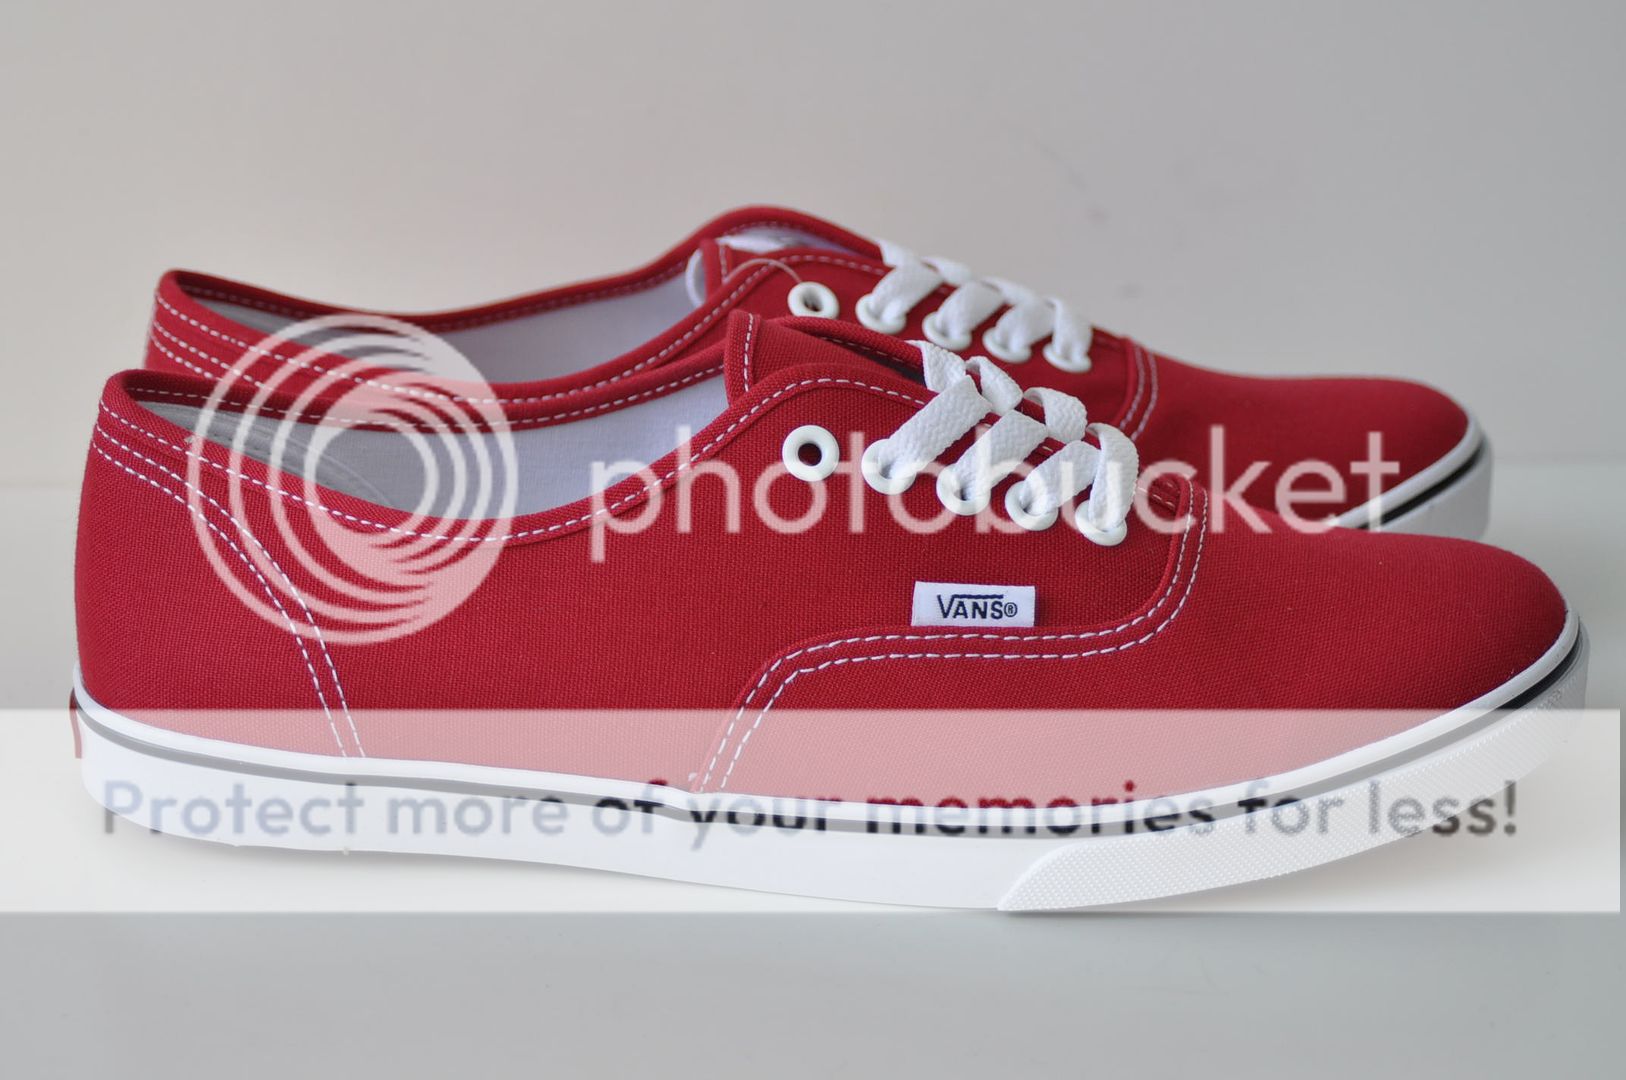 Vans Authentic Lo Pro Chili White Rot Schuhe Sneaker VN 0 F7B3MN 